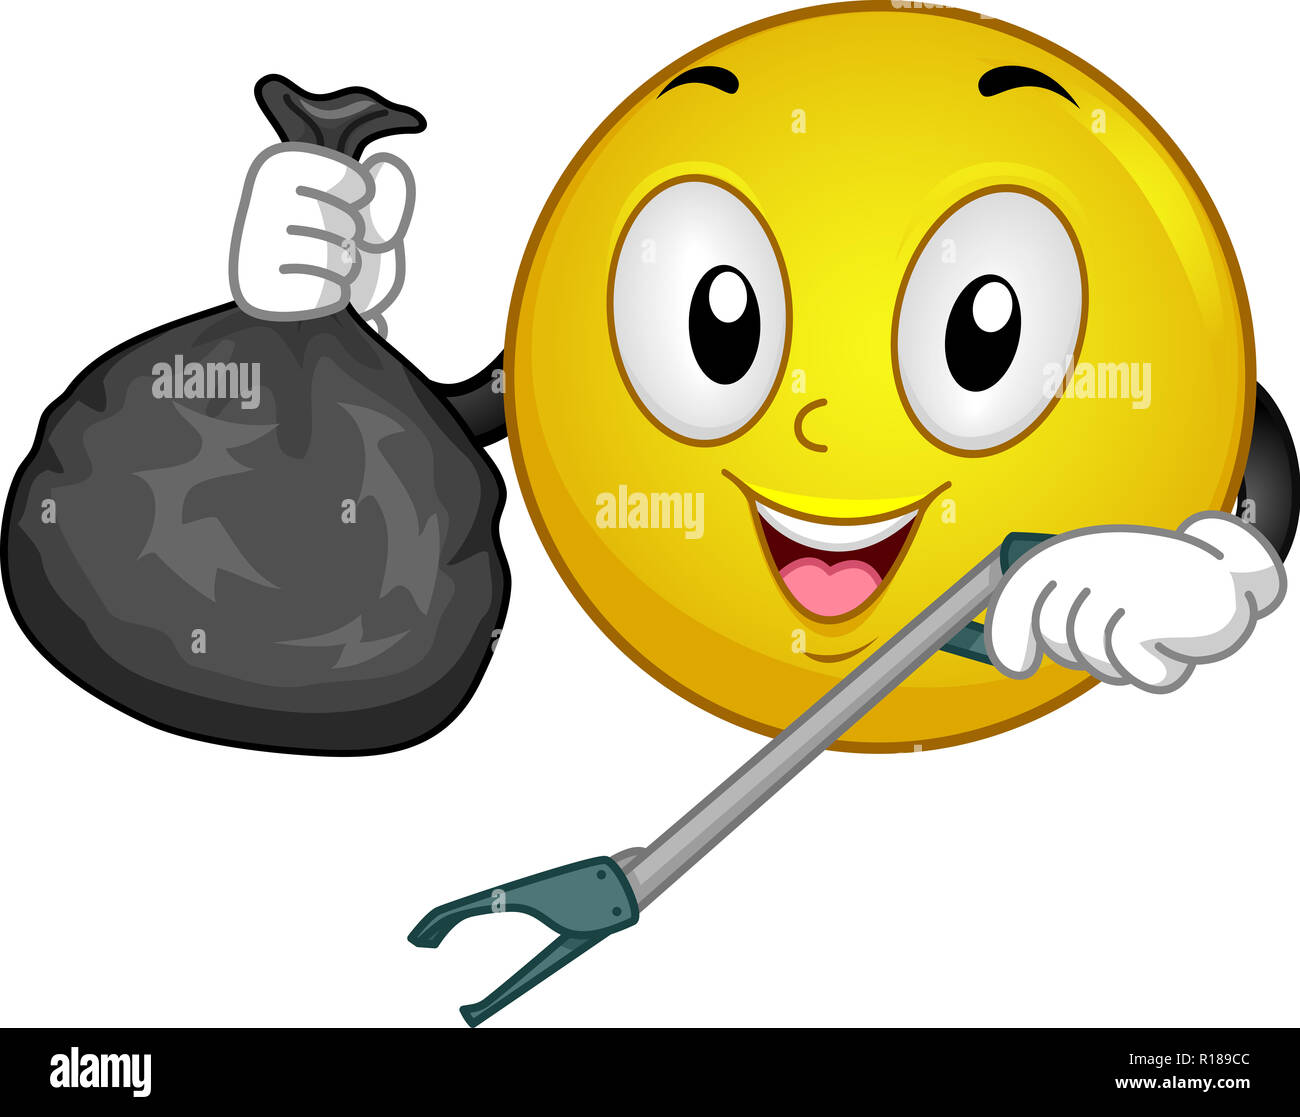 Illustration of a Mascot Smiley Holding a Garbage Picker and Black Garbage  Bag Stock Photo - Alamy